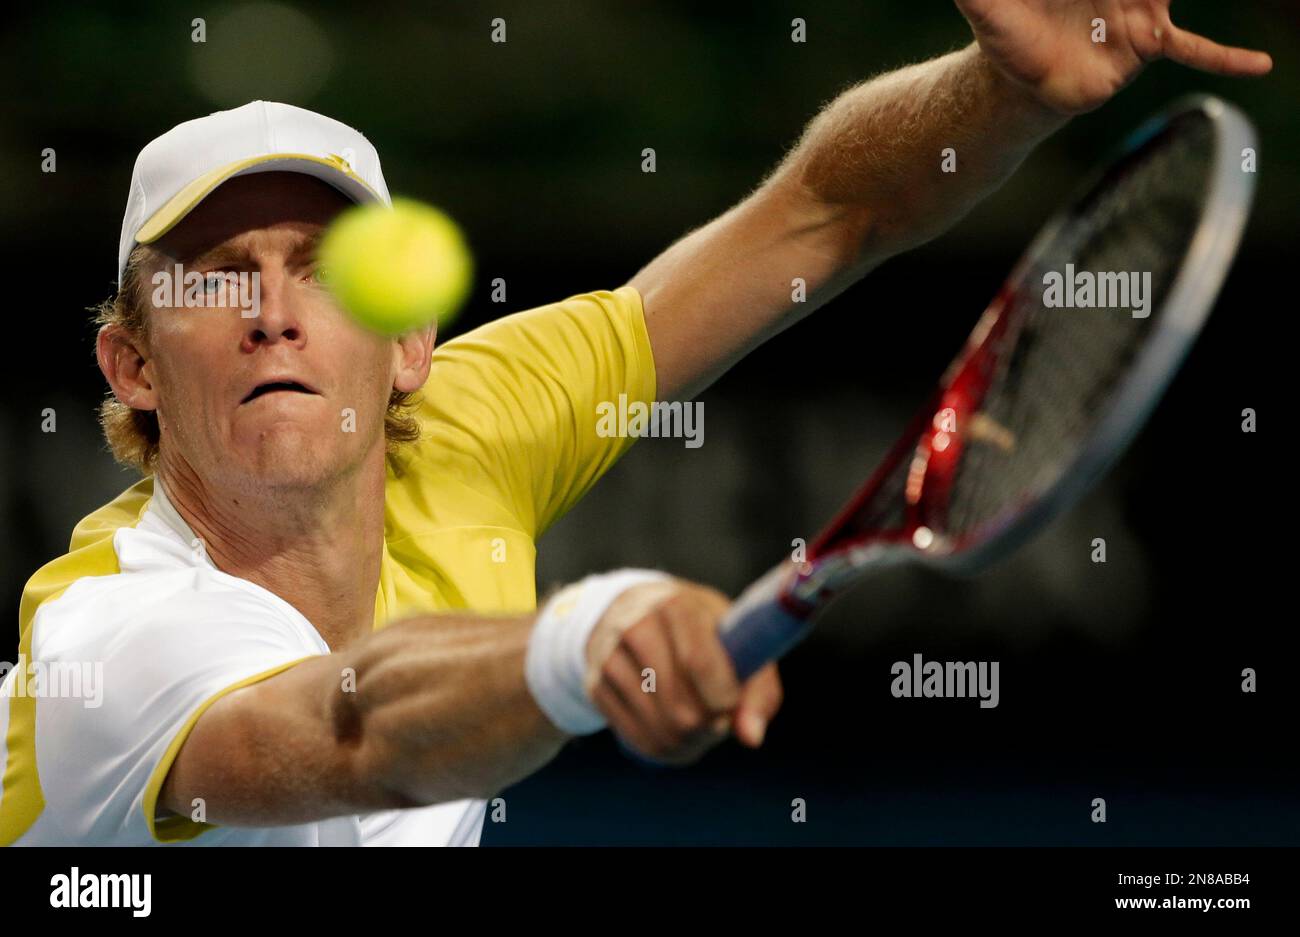 South Africa's Kevin Anderson makes a backhand return to Italy's Paolo  Lorenzi during their first round match at the Australian Open tennis  championship in Melbourne, Australia, Monday, Jan. 14, 2013. (AP Photo/Rob